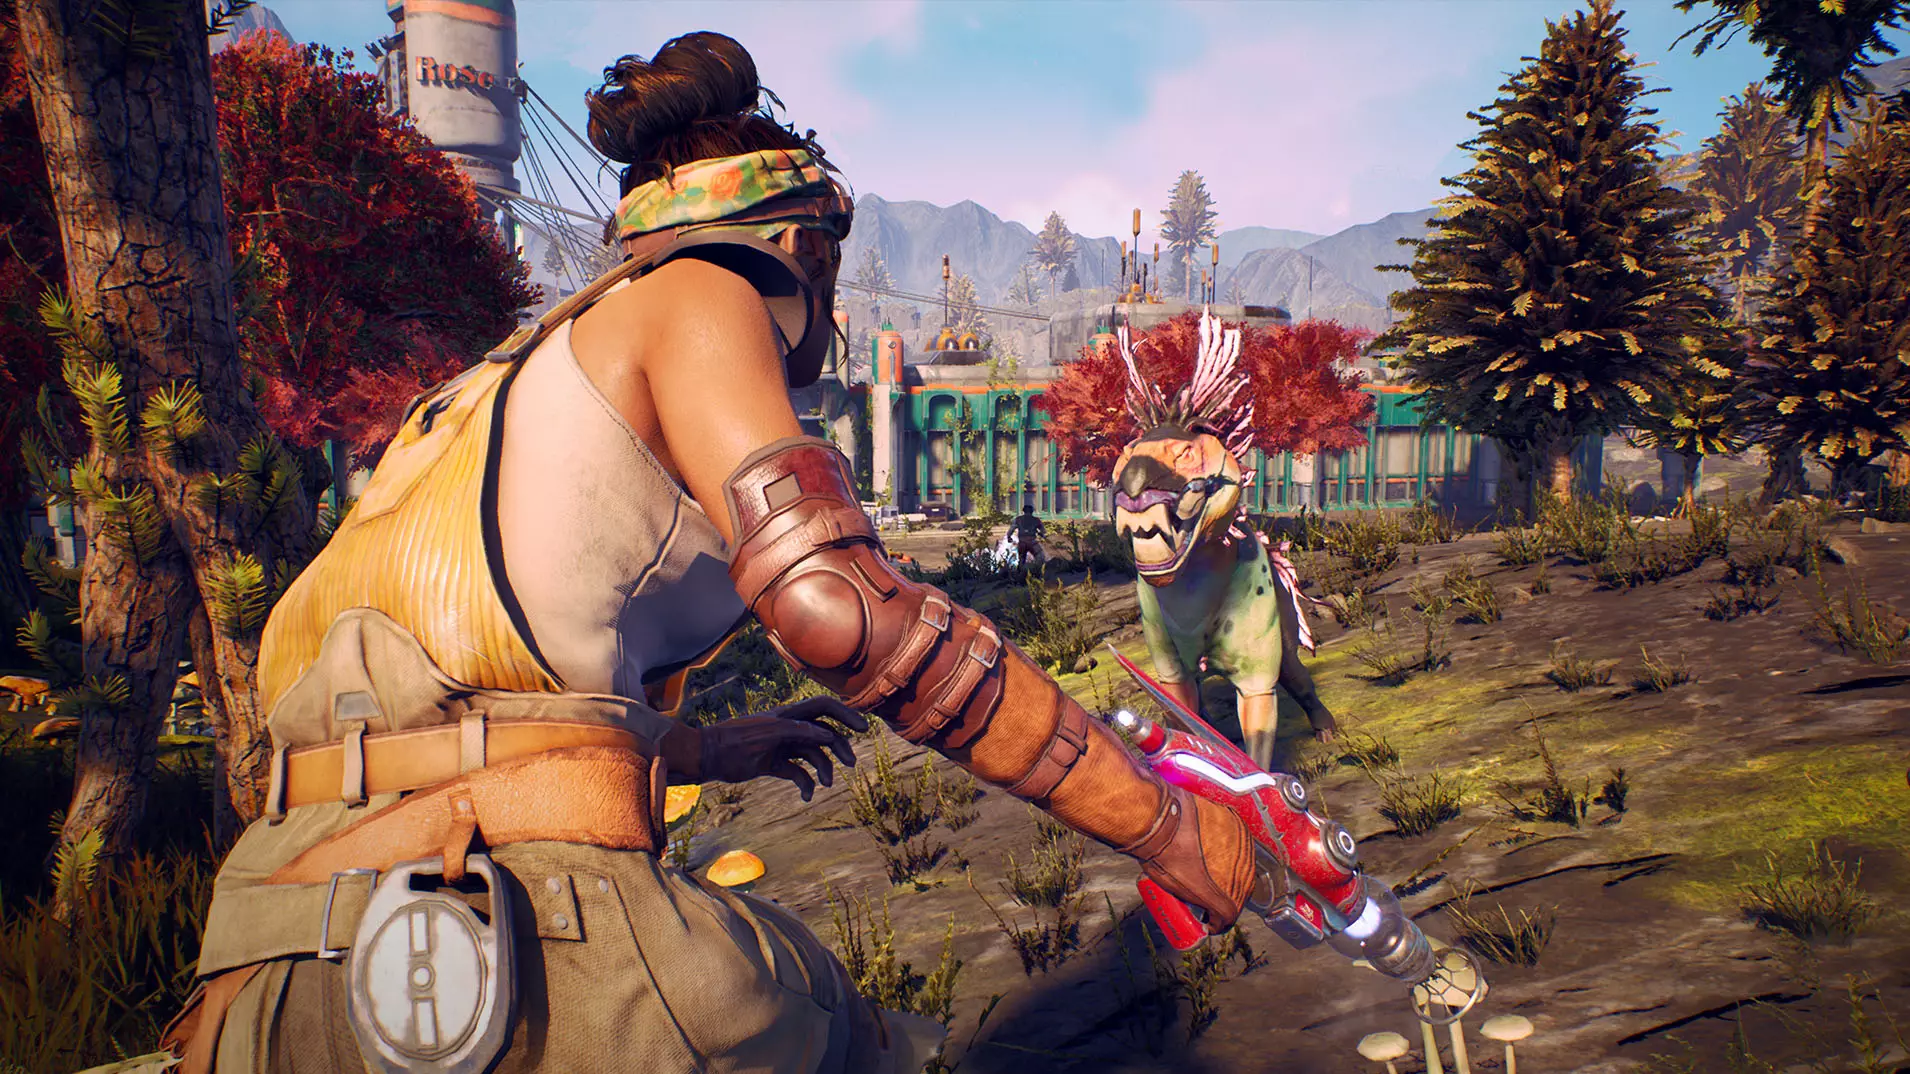 Imaginary Ladders, Not Space Cows, Were Killing ‘The Outer Worlds’ Companions